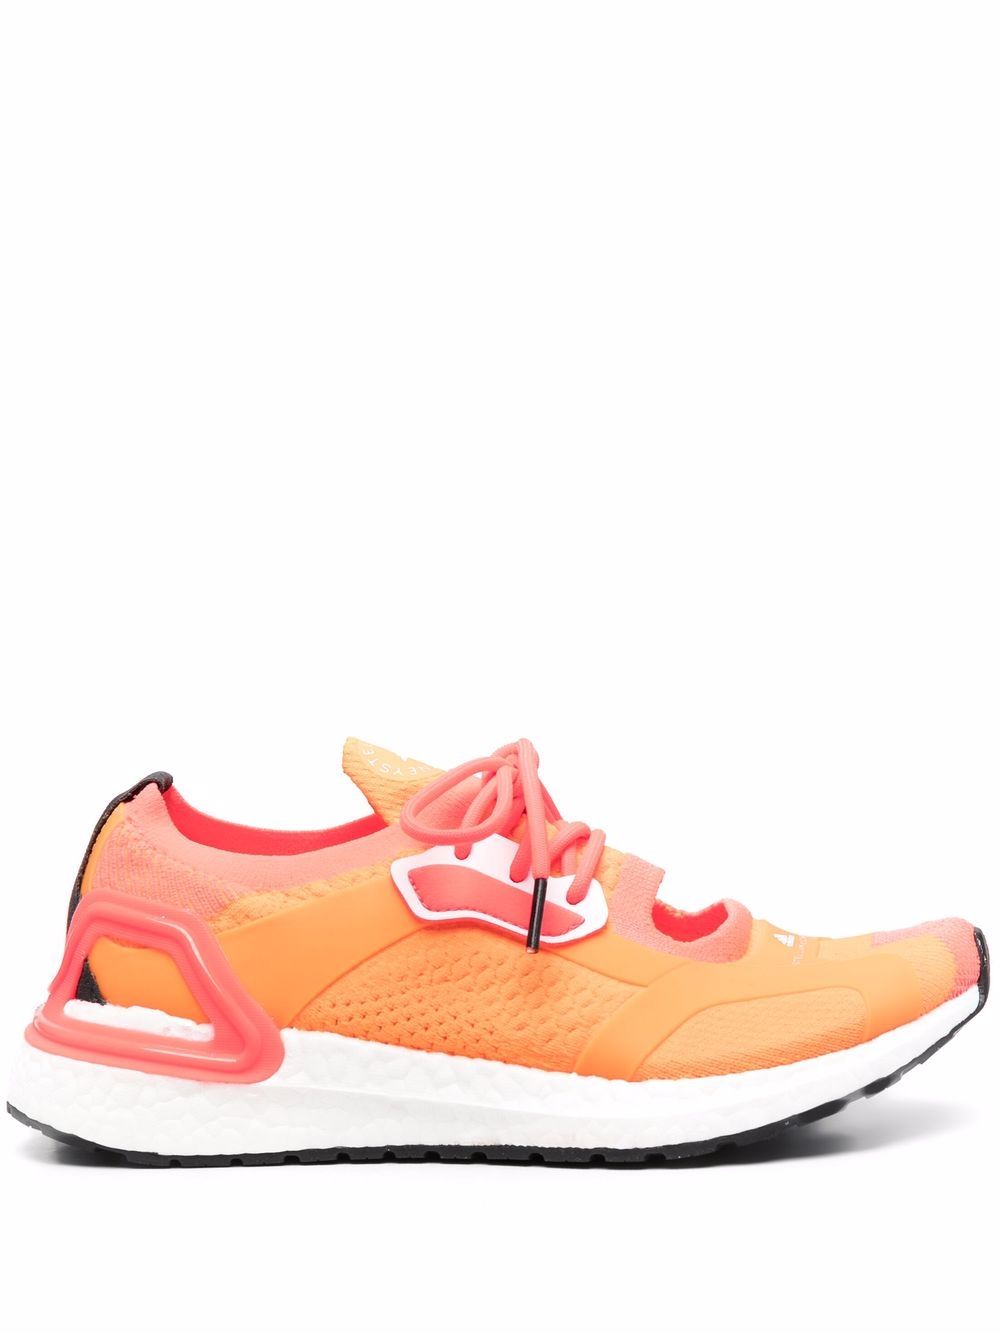 adidas by Stella McCartney cut-out low-top sneakers - Orange